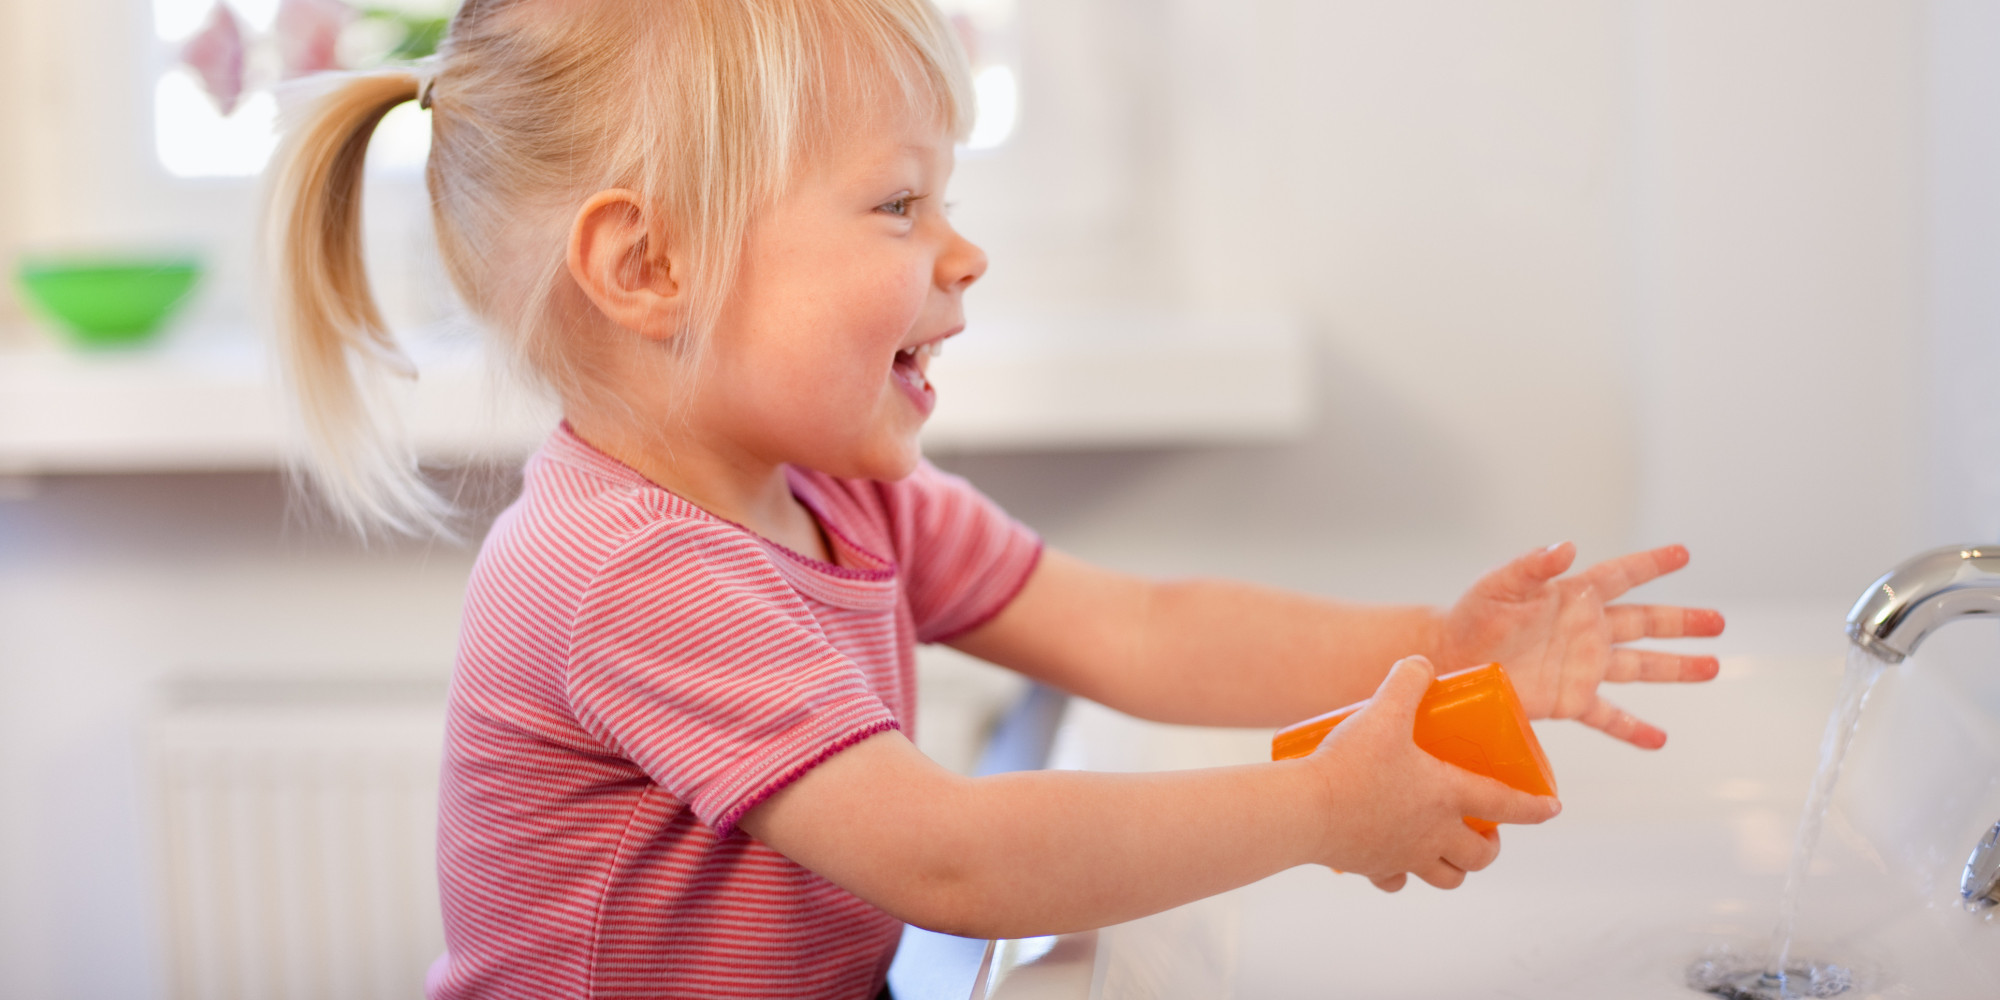 23 Tried-And-True Ways To Get Kids To Wash Their Hands | HuffPost